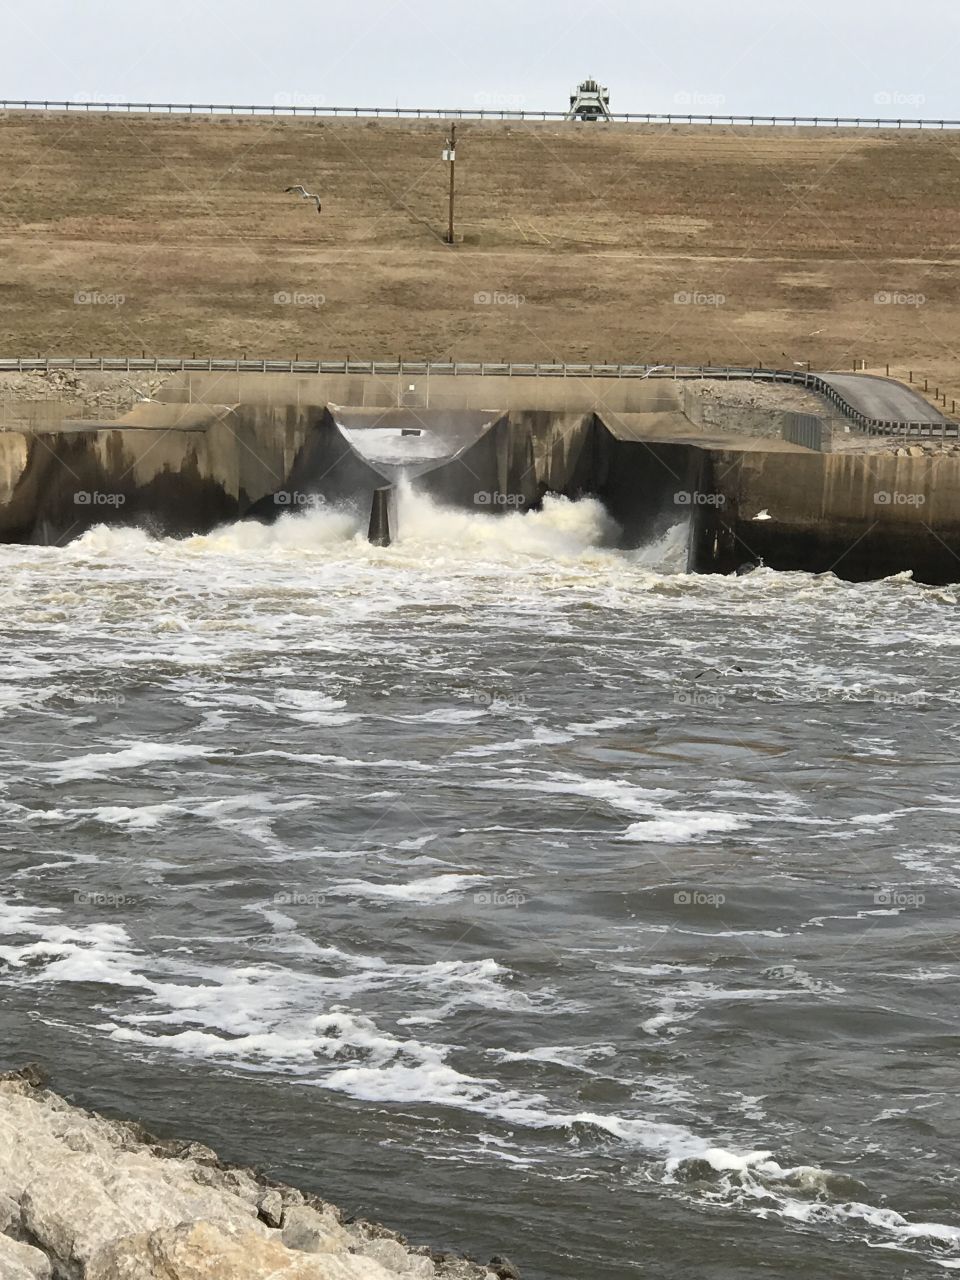 Oologah Dam, Oologah, Oklahoma flood gates water release winter January with birds seagulls searching for bait fish.